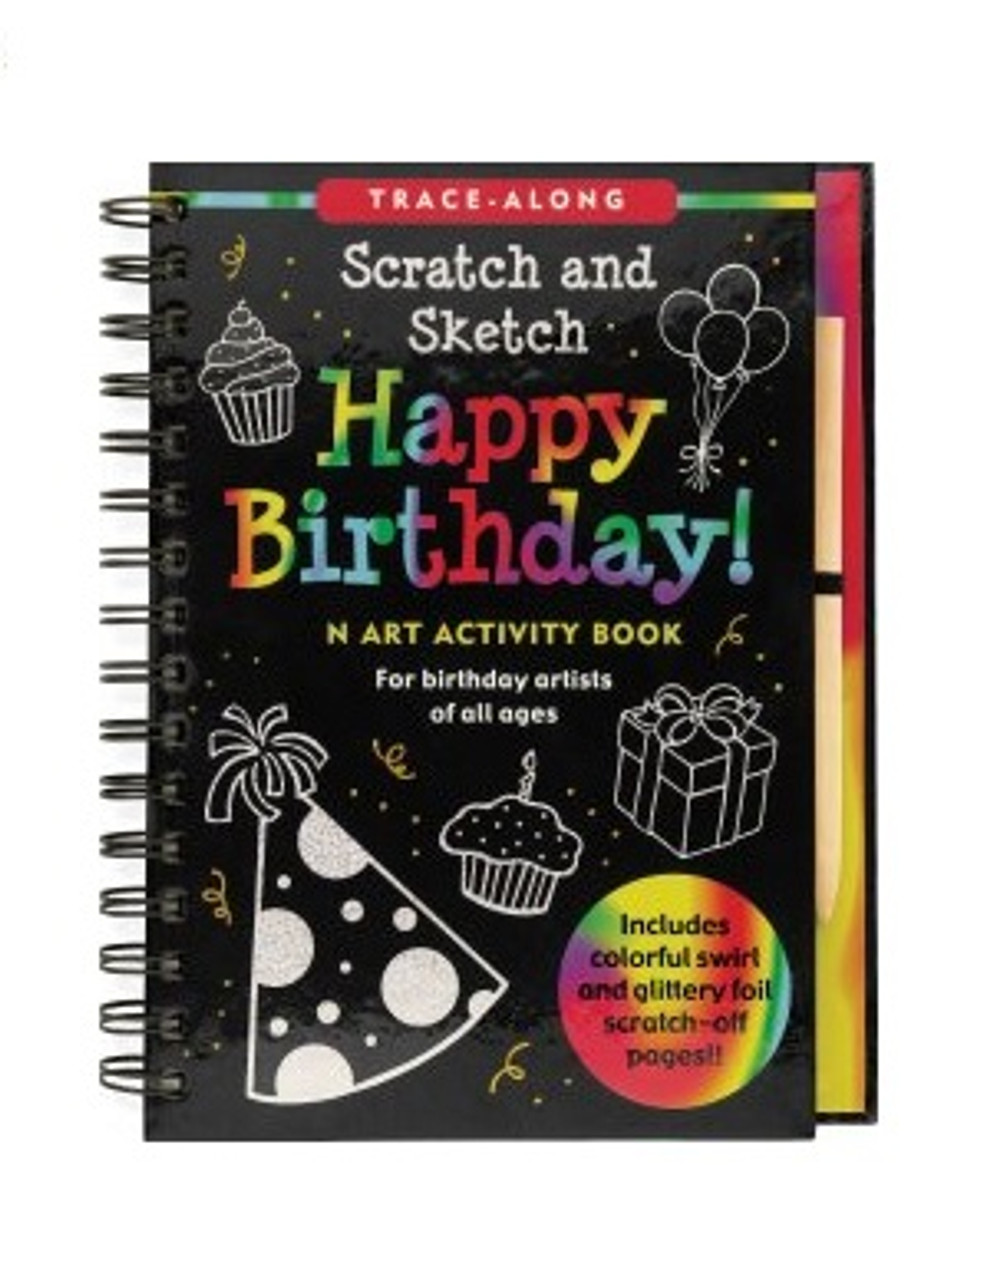 SCRATCH AND SKETCH HAPPY BIRTHDAY